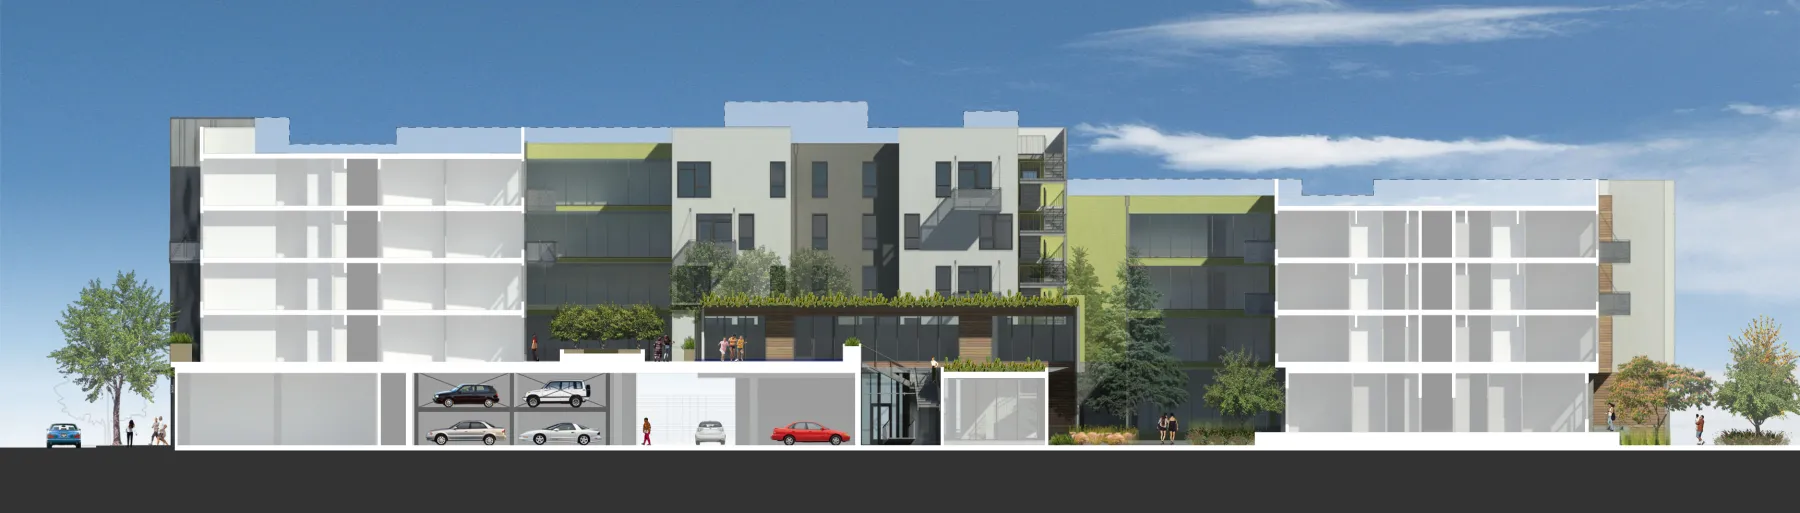 Rendered street view of Five88 in San Francisco from the east west.